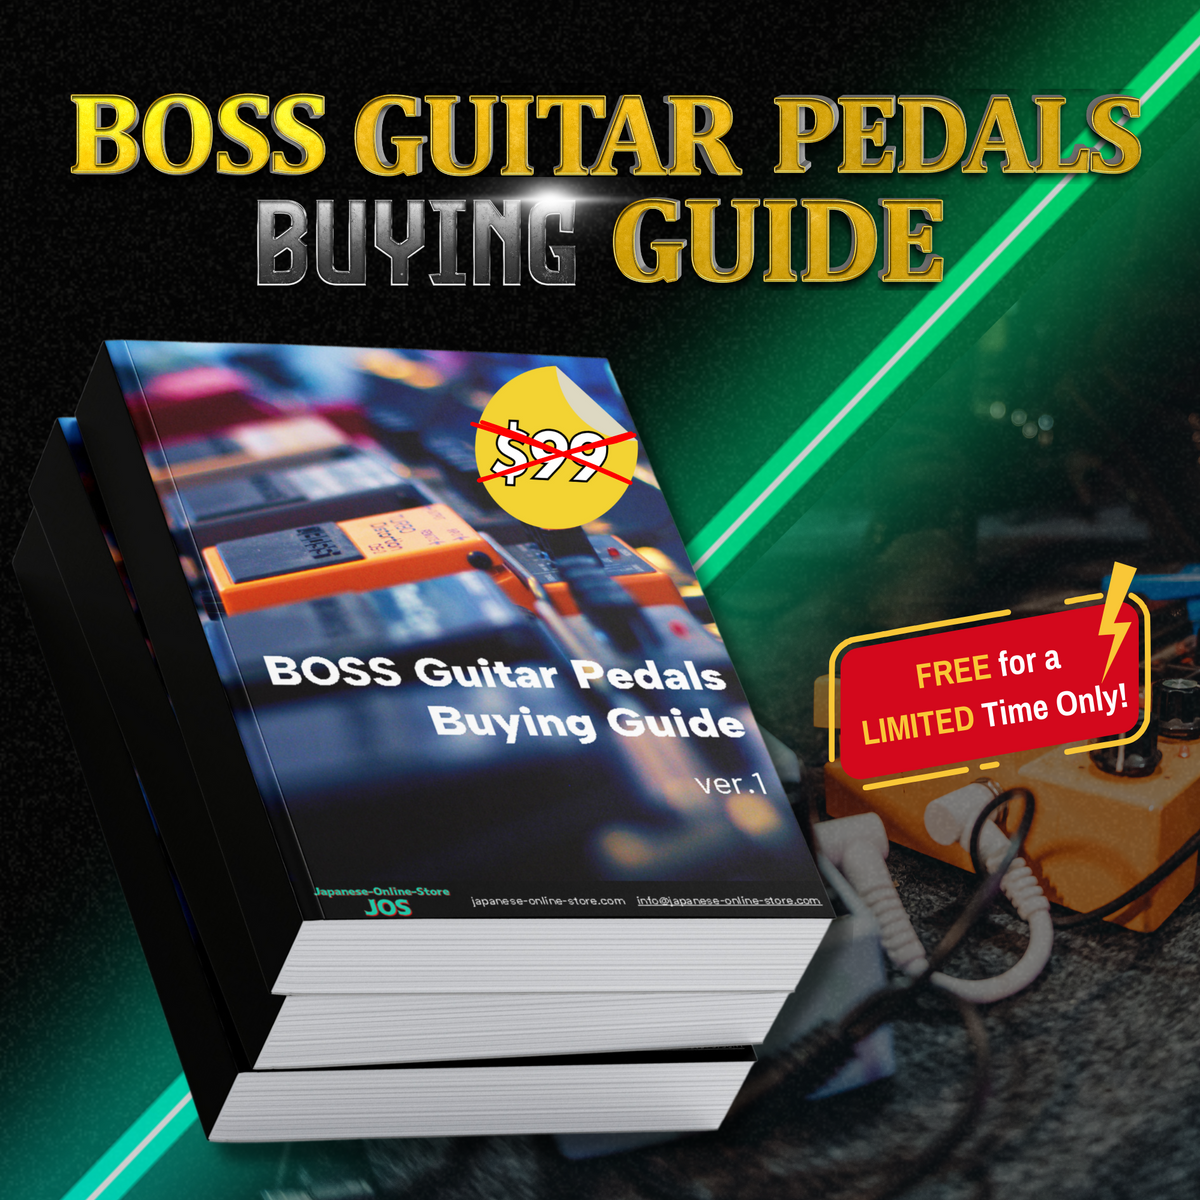 BOSS Guitar Pedals Buying Guide eBook — 167 Pages of Comprehensive Knowledge!